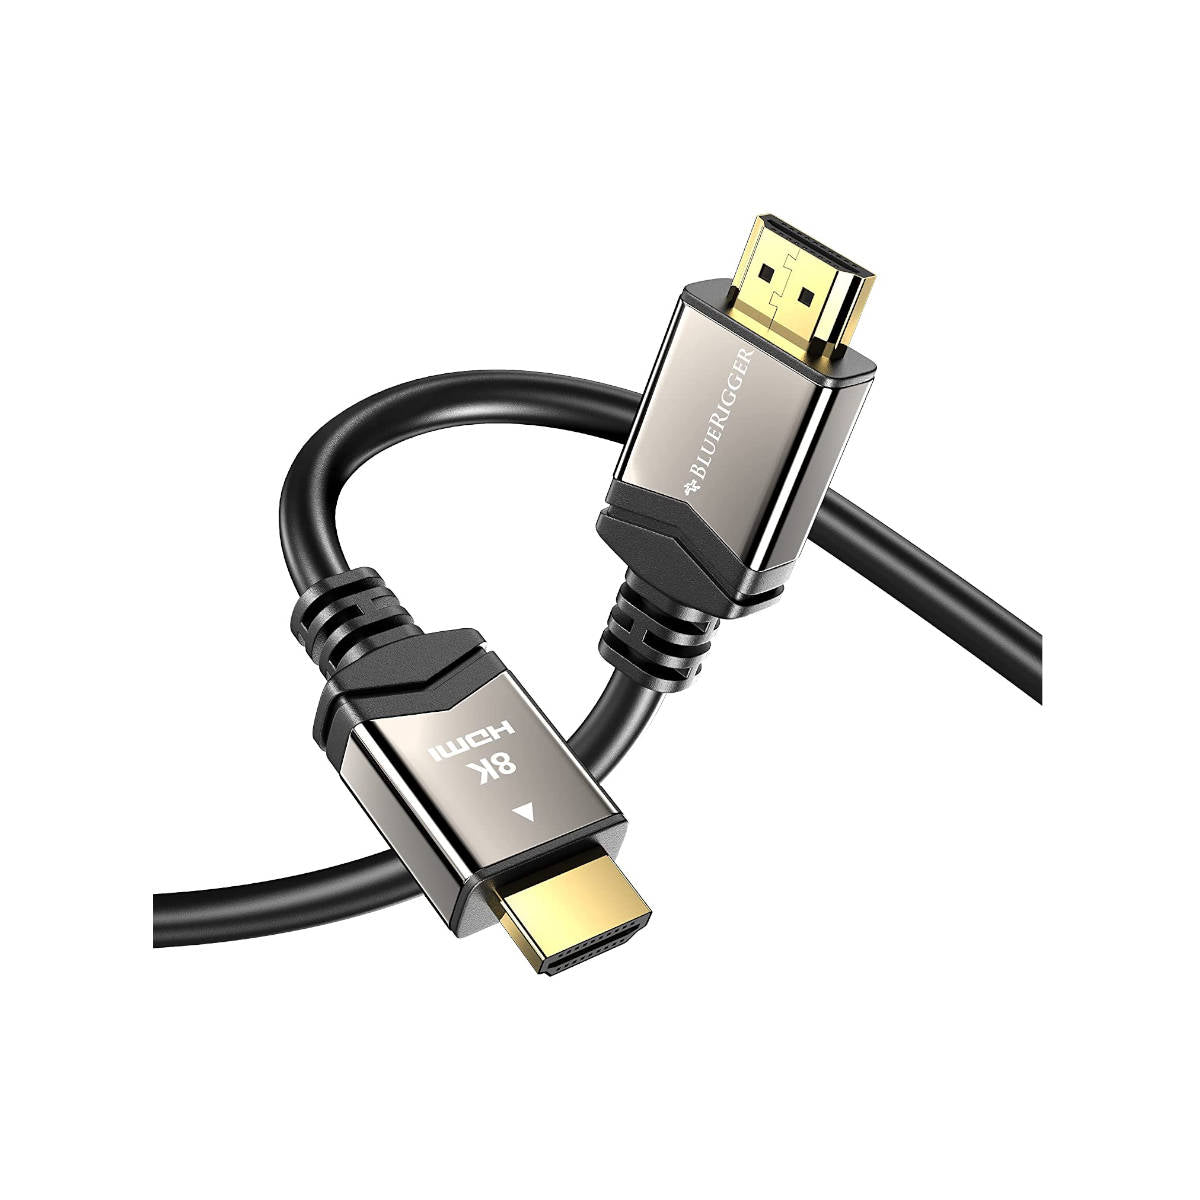 4K HDMI Cable - High Speed HDMI Cables Online in India - Ooberpad